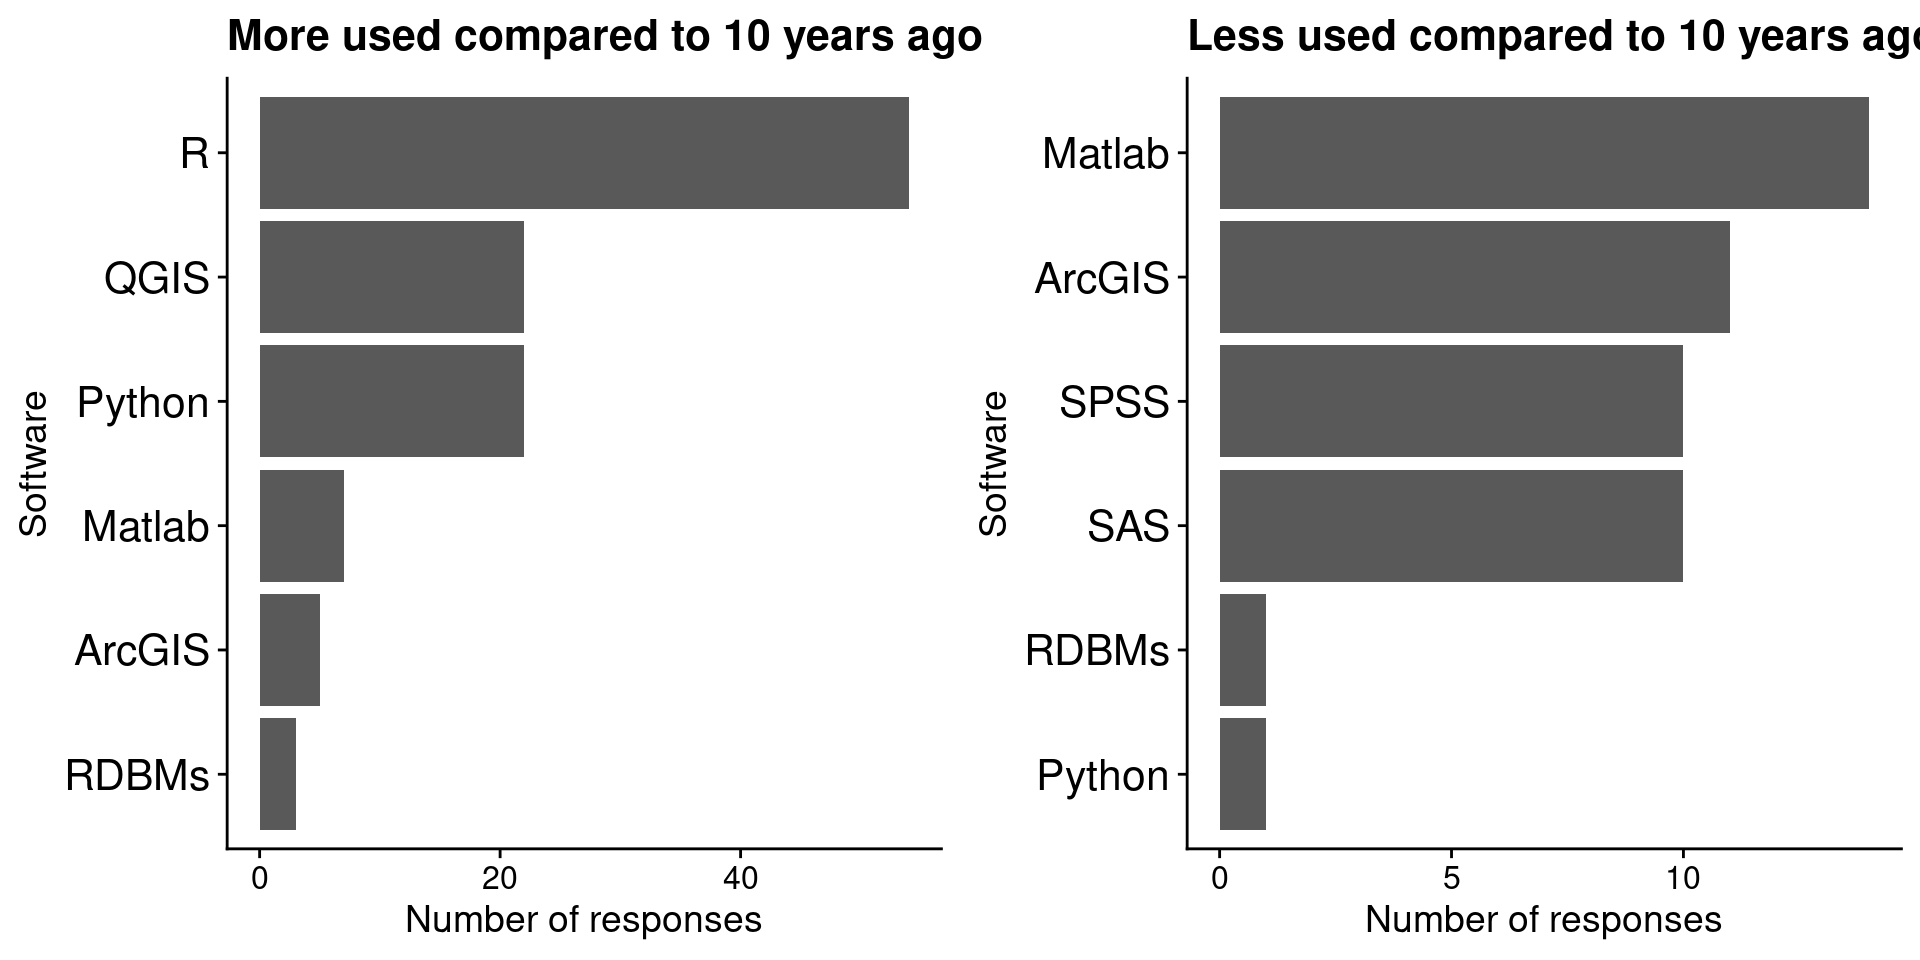 Left: horizontal bar plots indicating participants' votes on which software are more used now compared to ten years ago. In decreasing order of votes: R, QGIS, Python, Matlab, ArcGIS, RDBMs. Right: horizontal bar plots indicating participants' votes on which software are less used now compared to ten years ago. In decreasing order of votes: Matlab, ArcGIS, SPSS, SAS, RDBMs, Python.